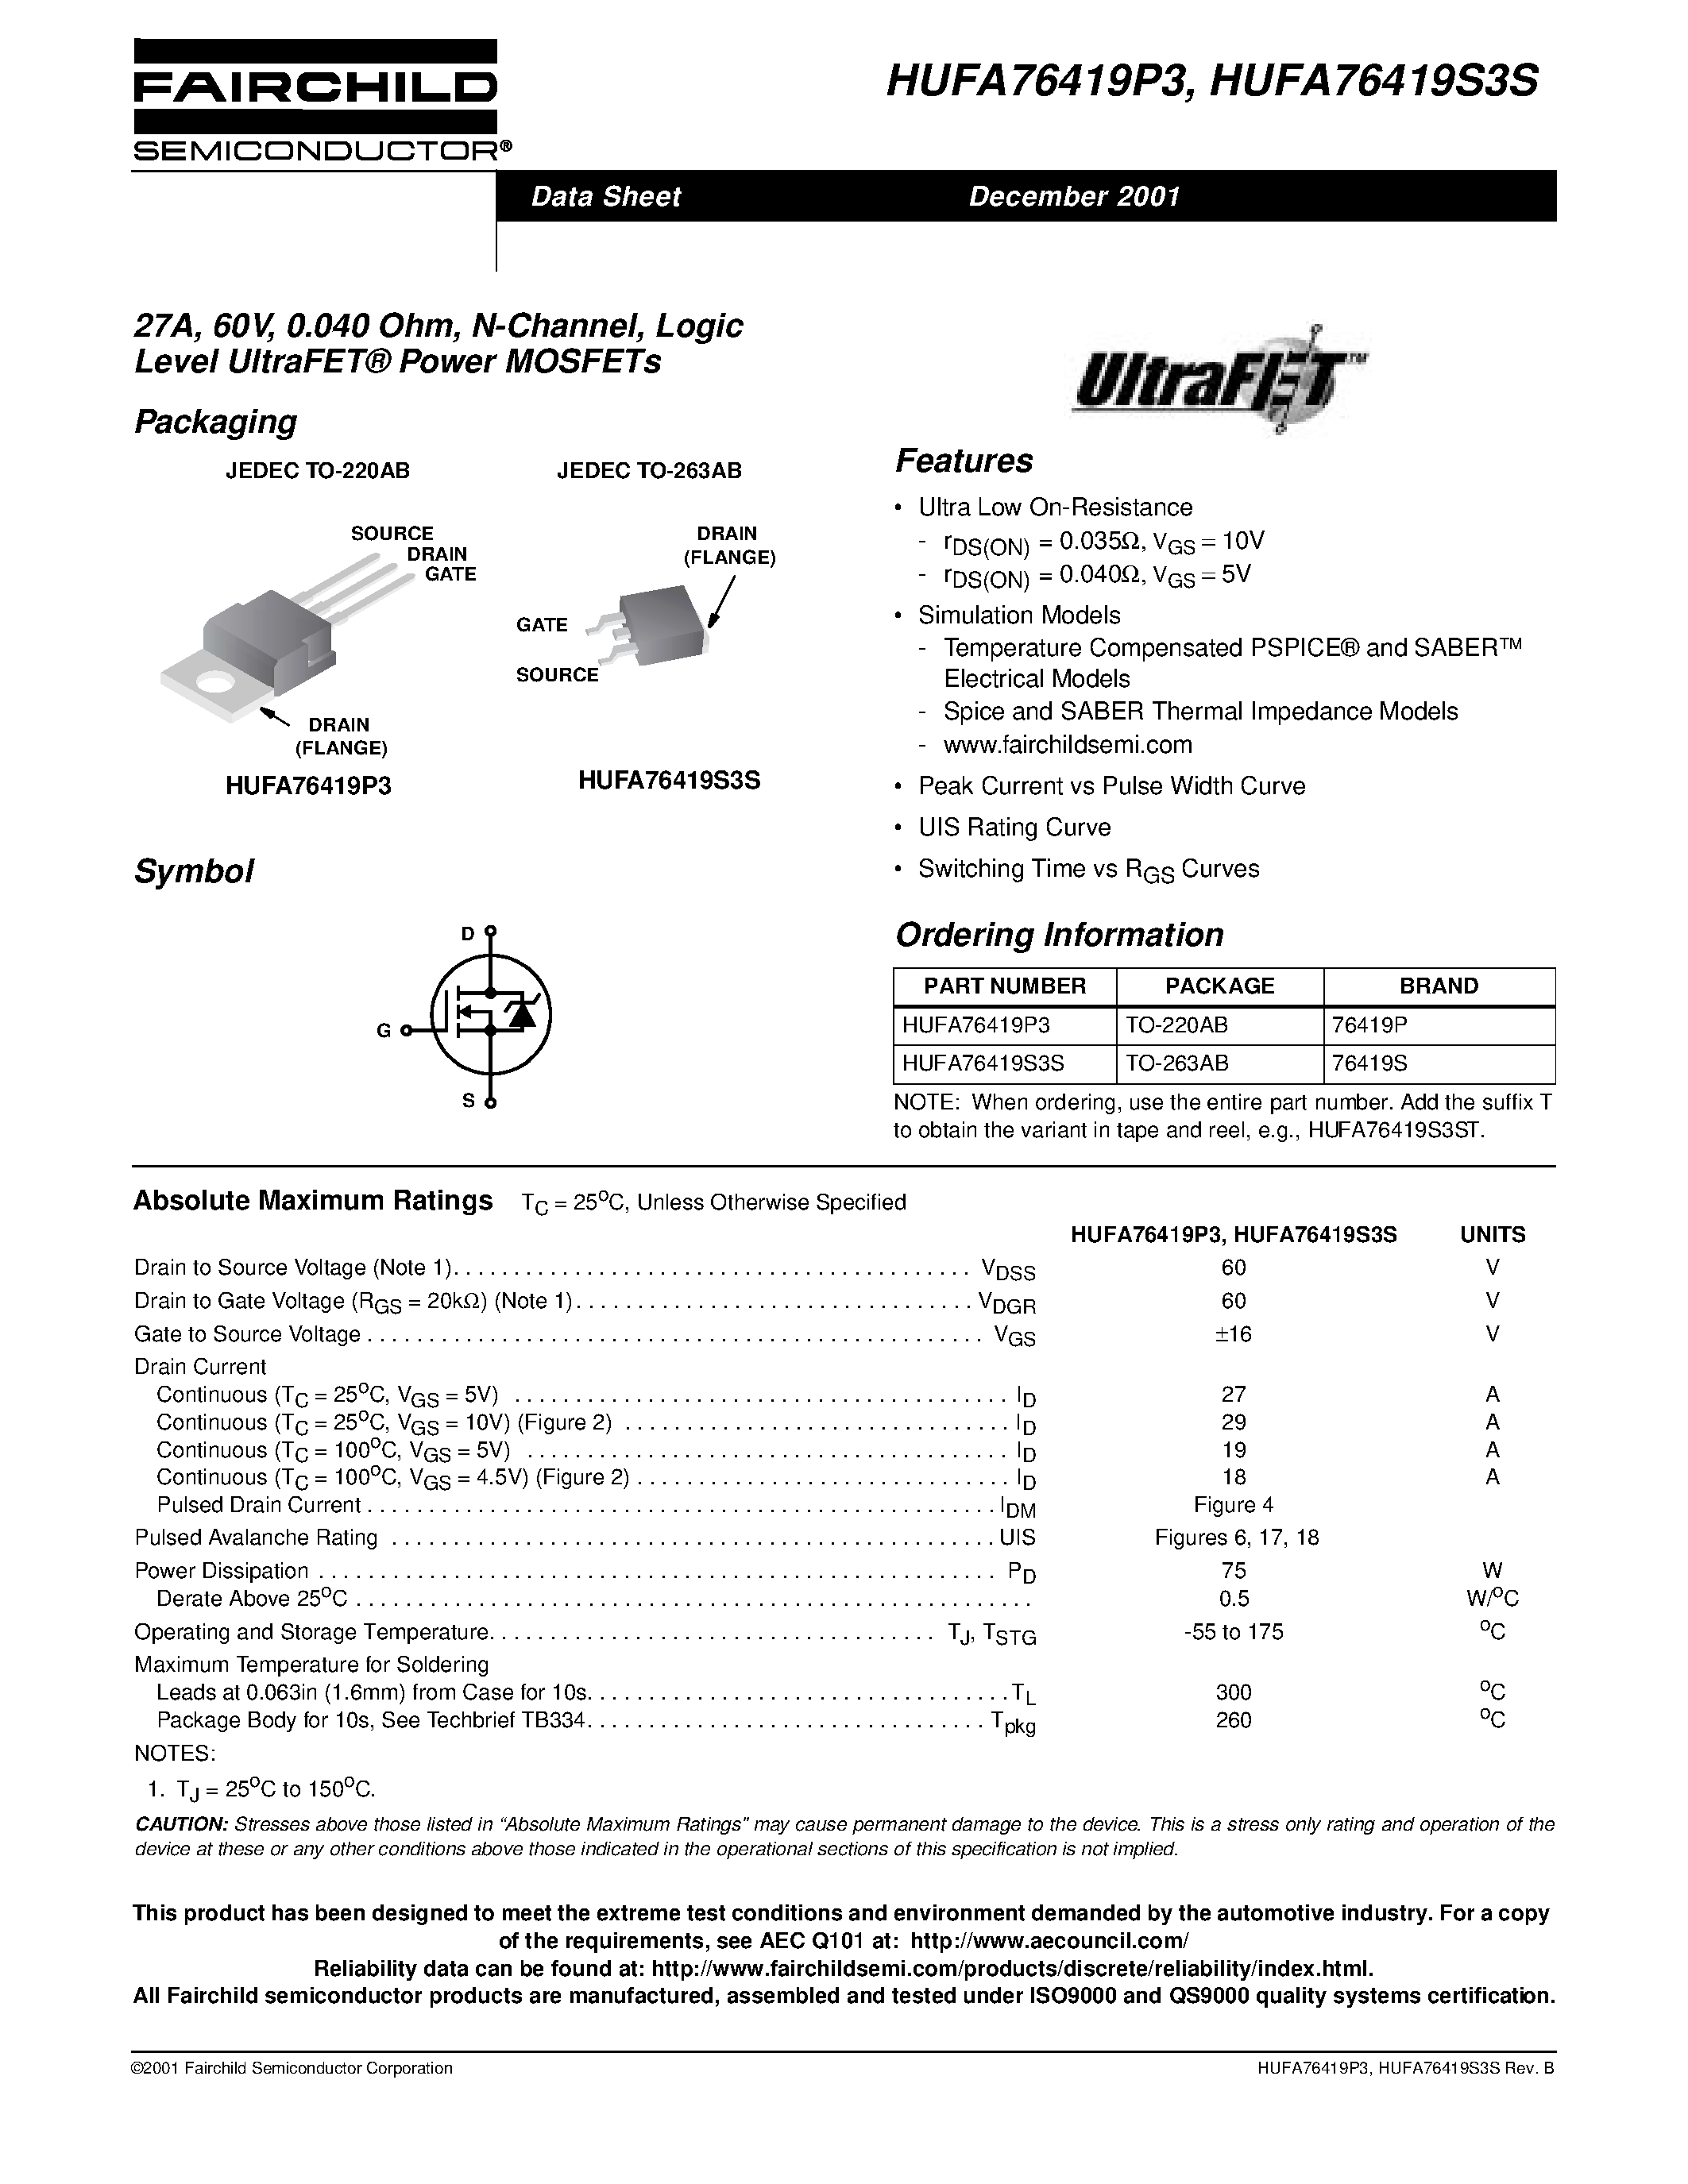 Datasheet HUFA76419S3S - 27A/ 60V/ 0.040 Ohm/ N-Channel/ Logic Level UltraFET Power MOSFETs page 1